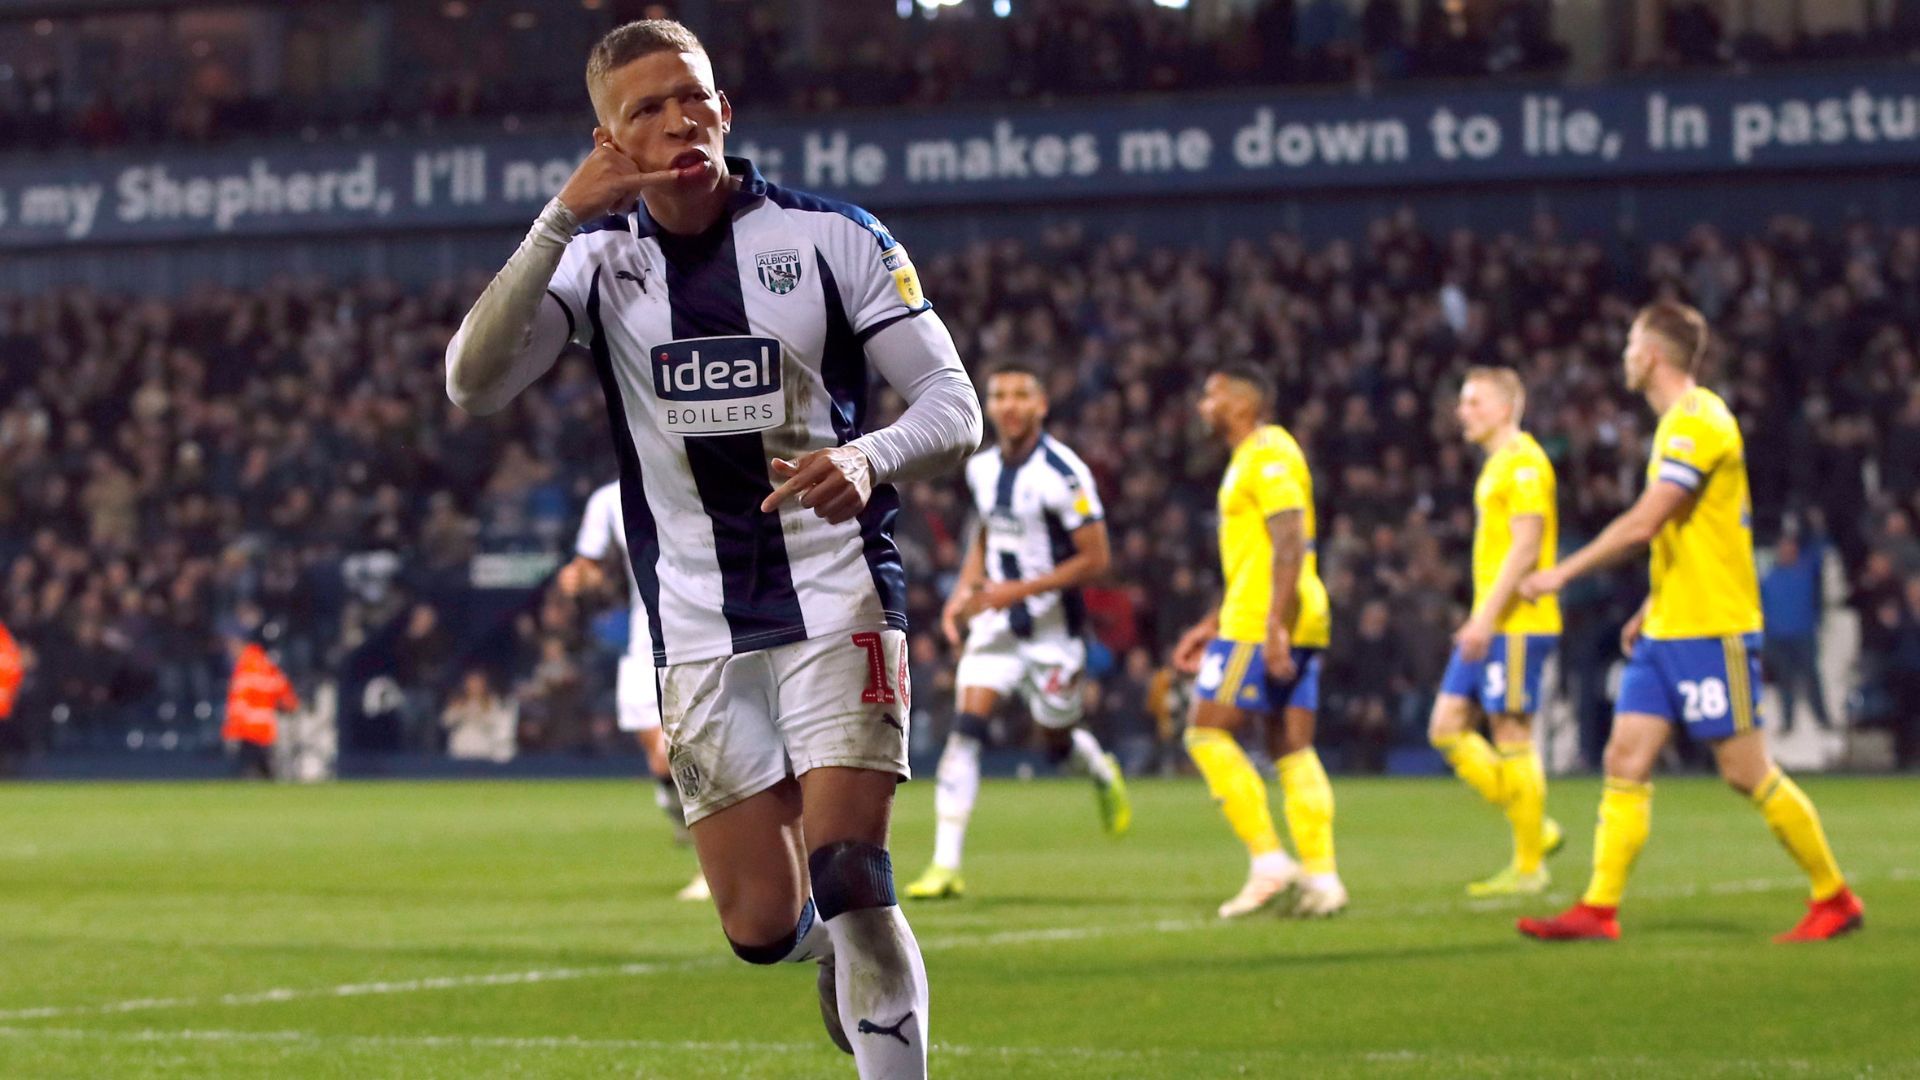 DWIGHT GAYLE - WEST BROMWICH ALBION